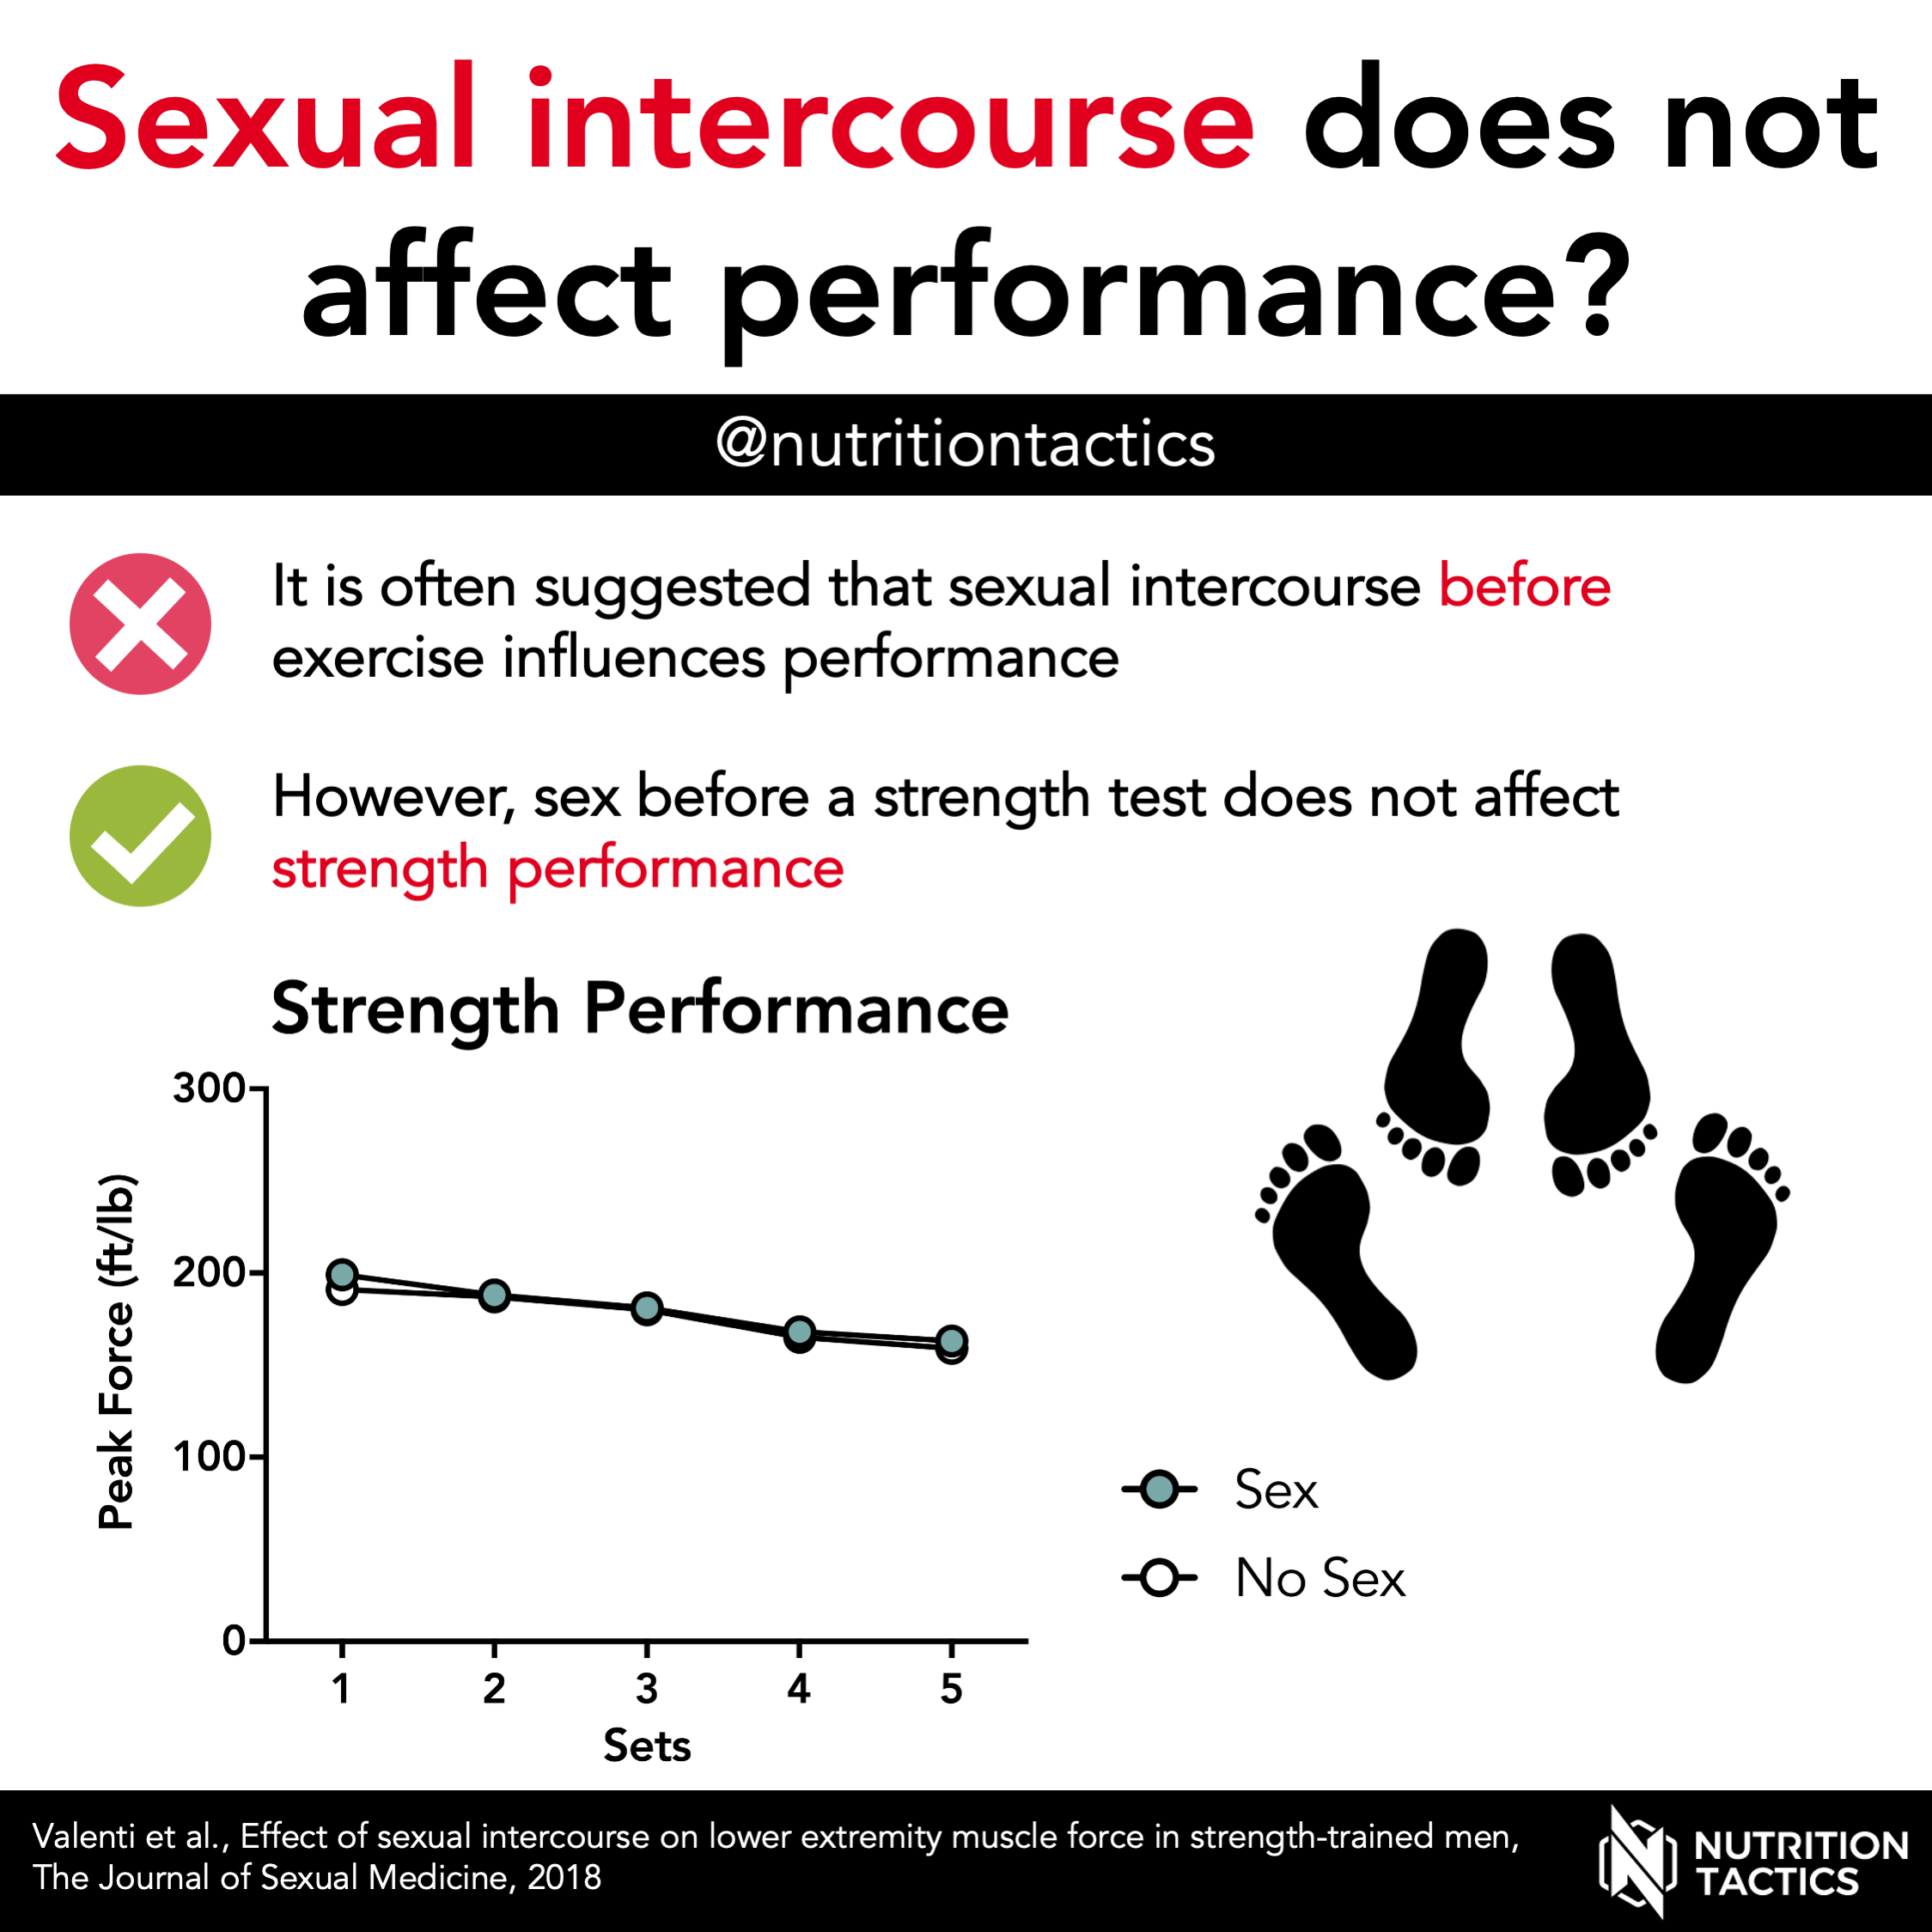 Sex before exercise